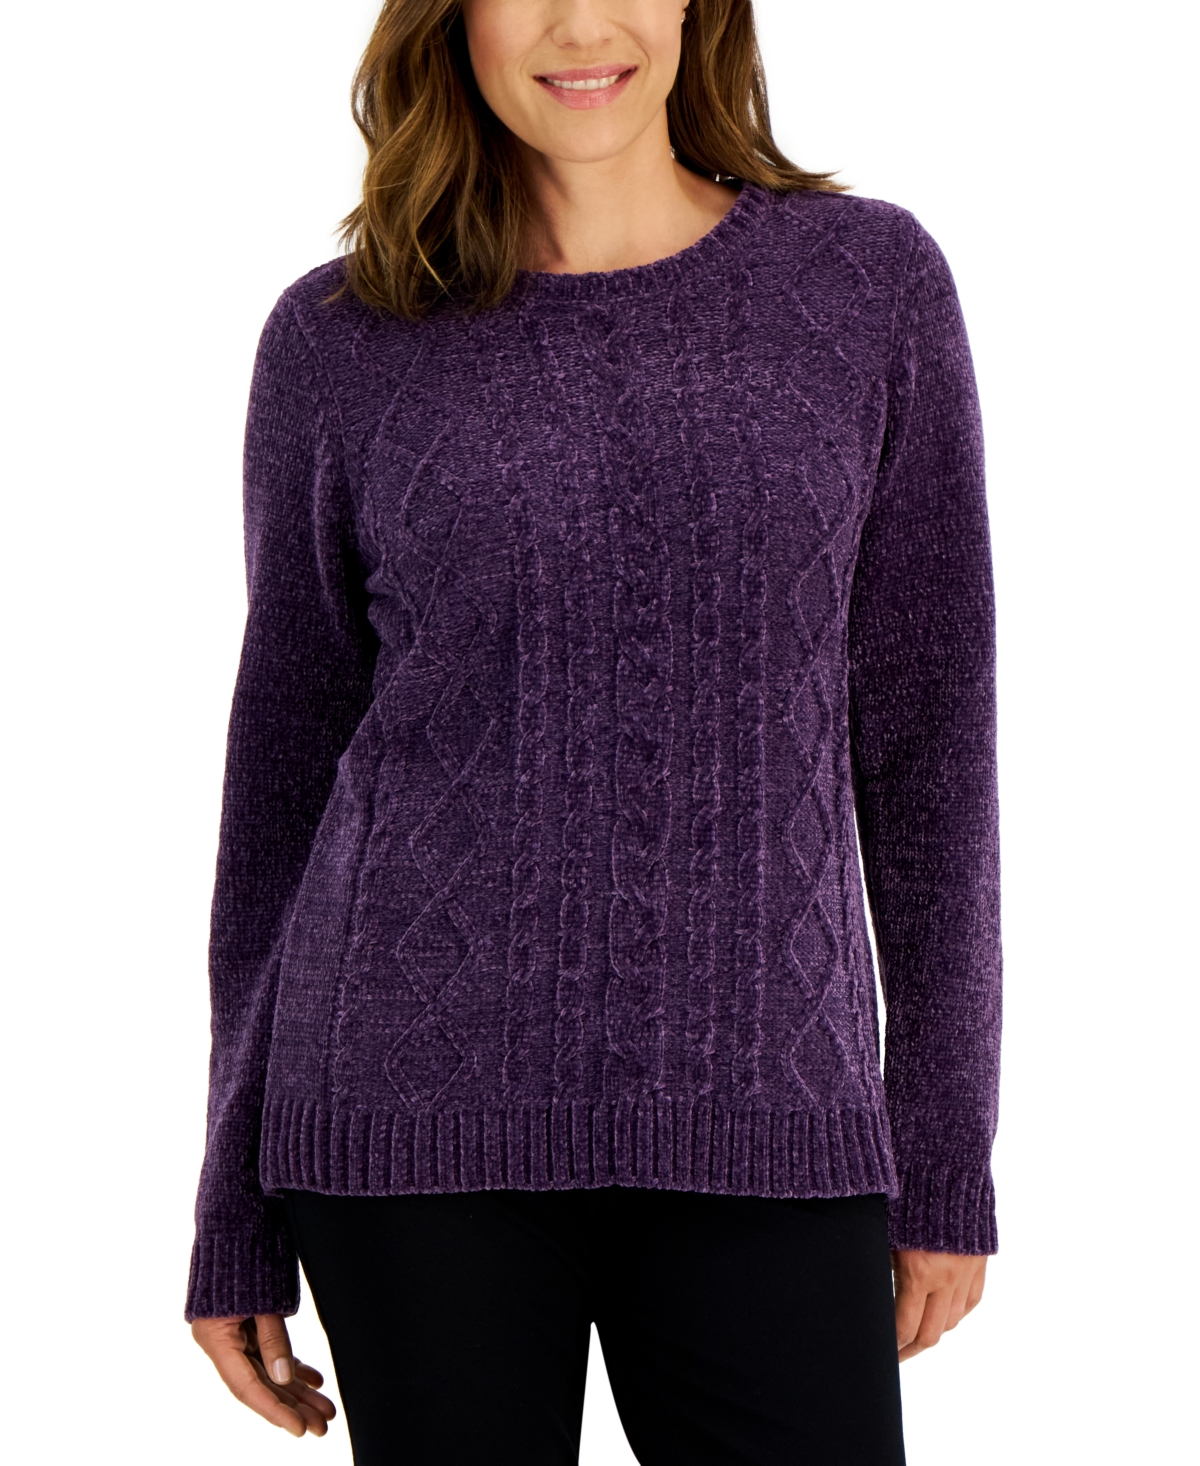 Women's Cable-Knit Sweater, Created for Macy's - Purple Dynasty